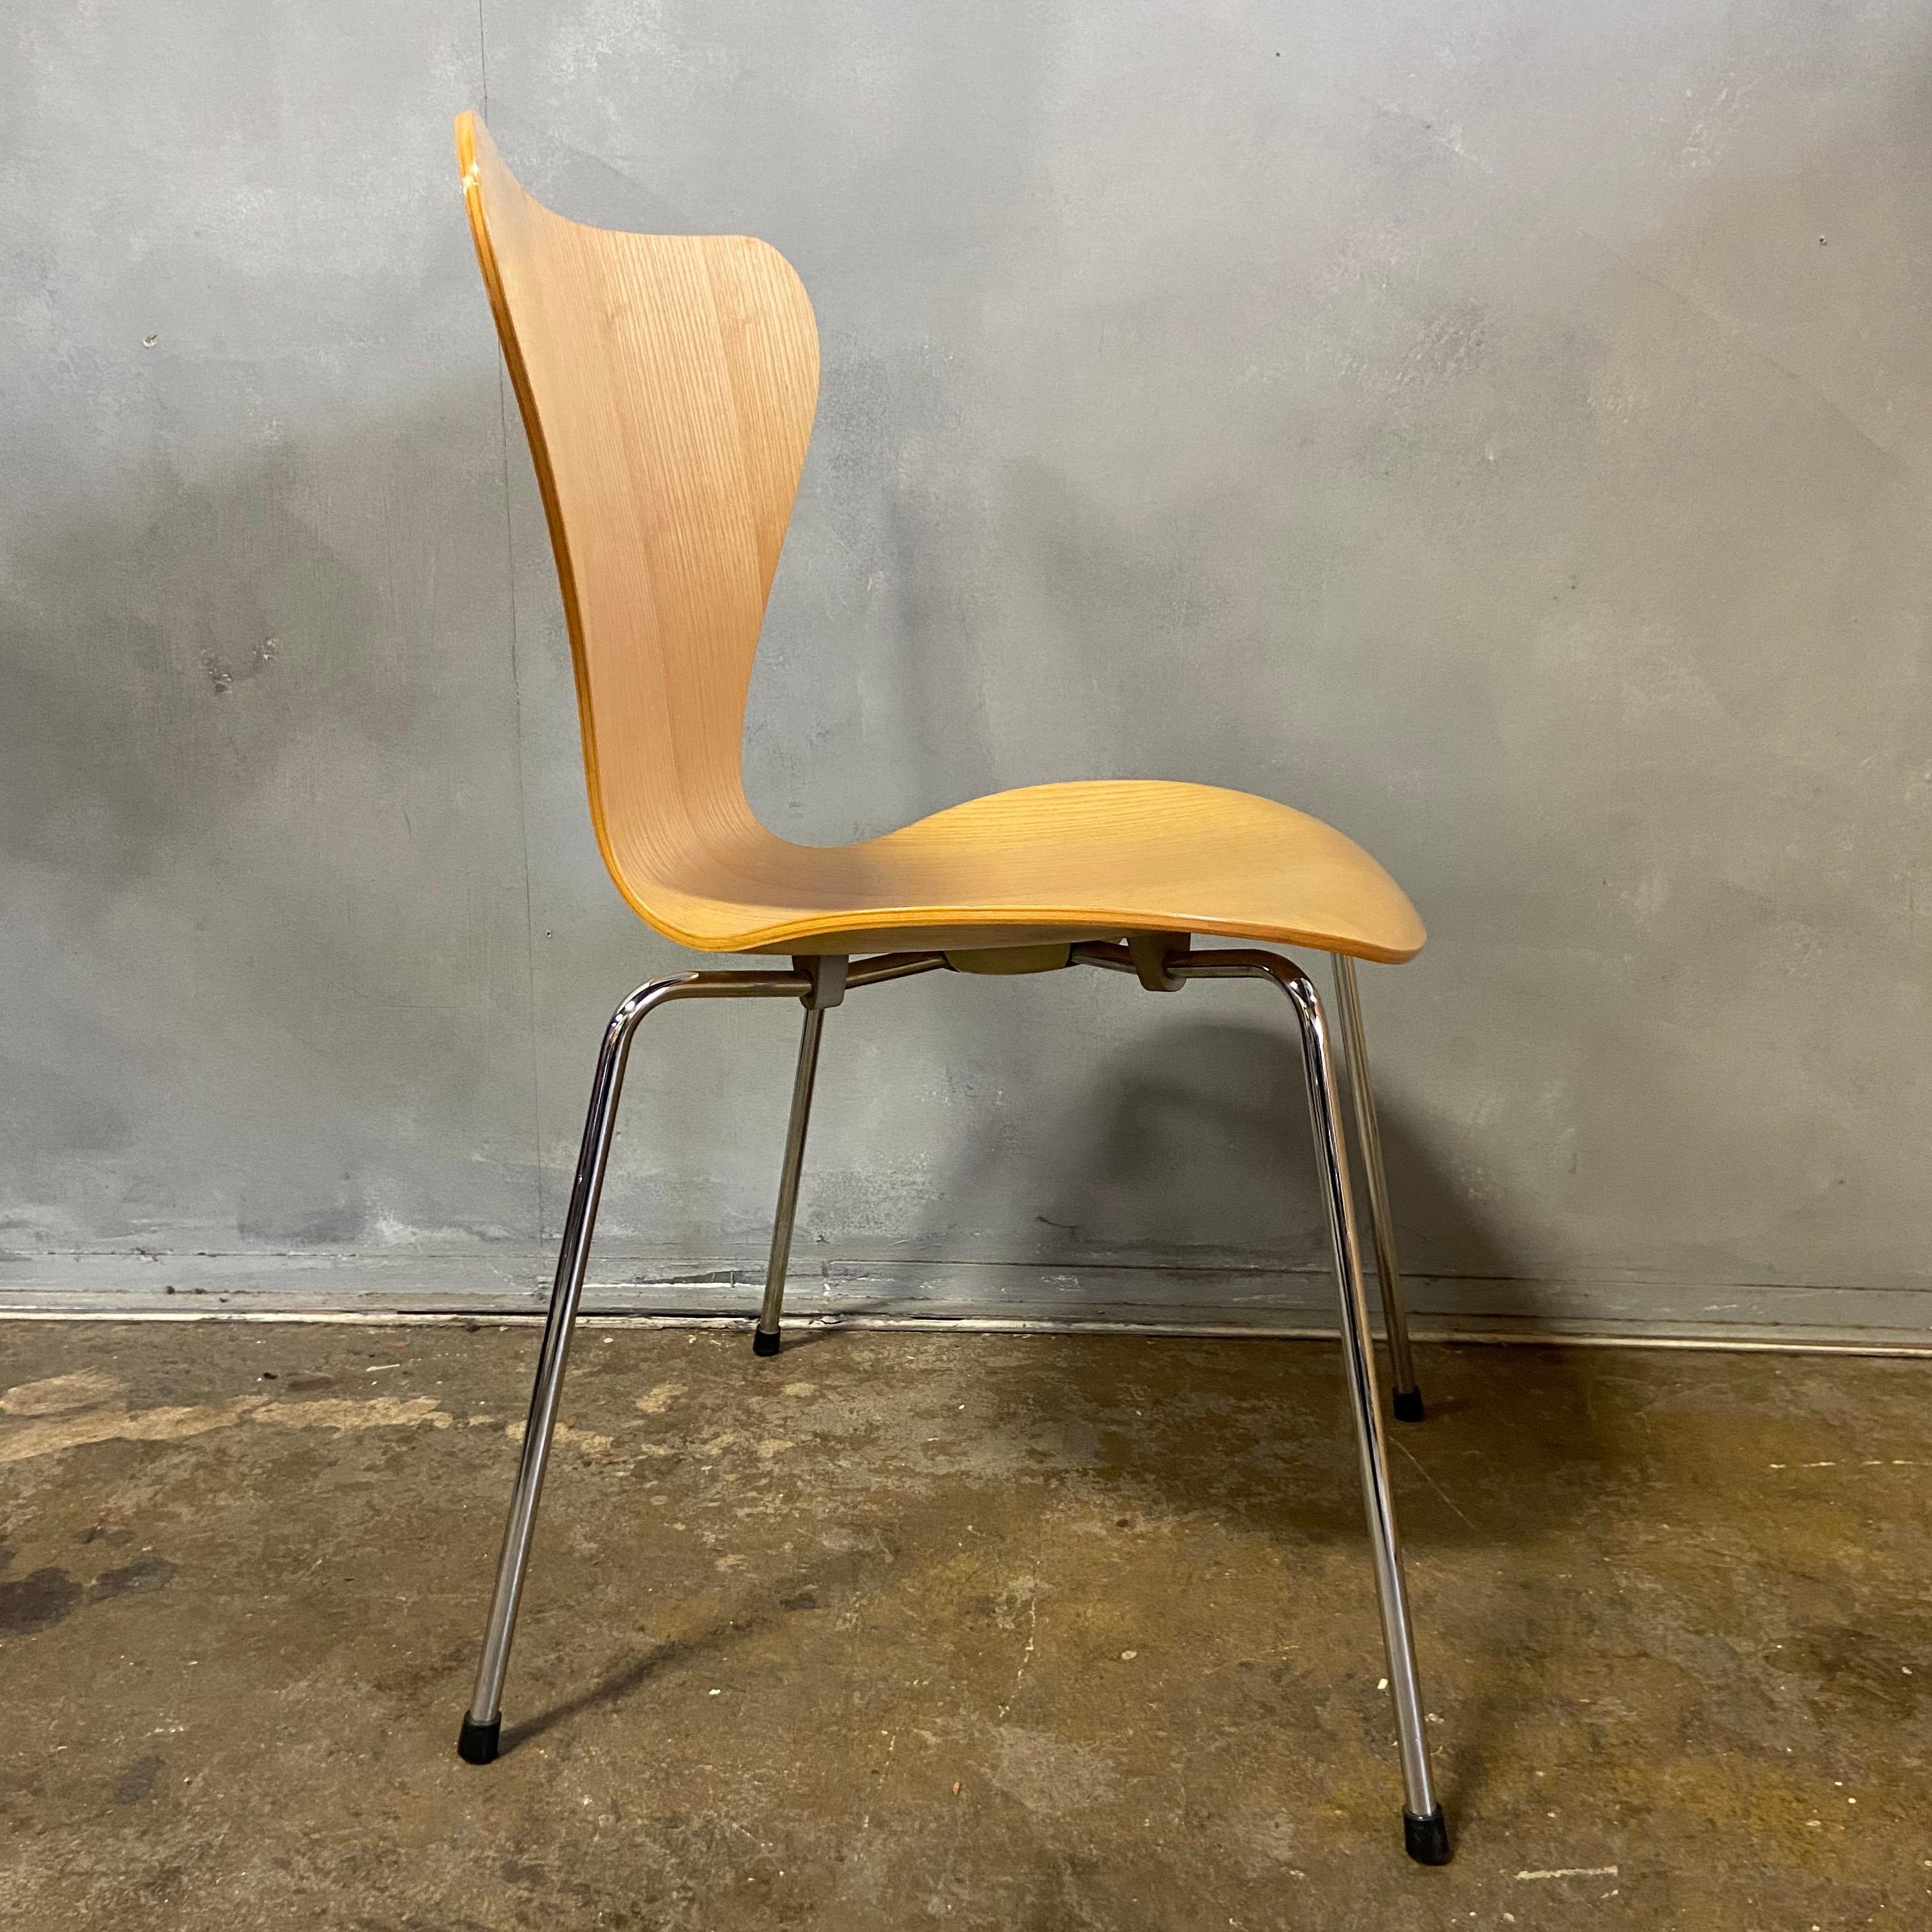 8 Arne Jacobsen series 7 chairs for Fritz Hansen. This iconic design is one of the most successful chairs every produced from this era. Incredibly comfortable as versatile.  
   
 